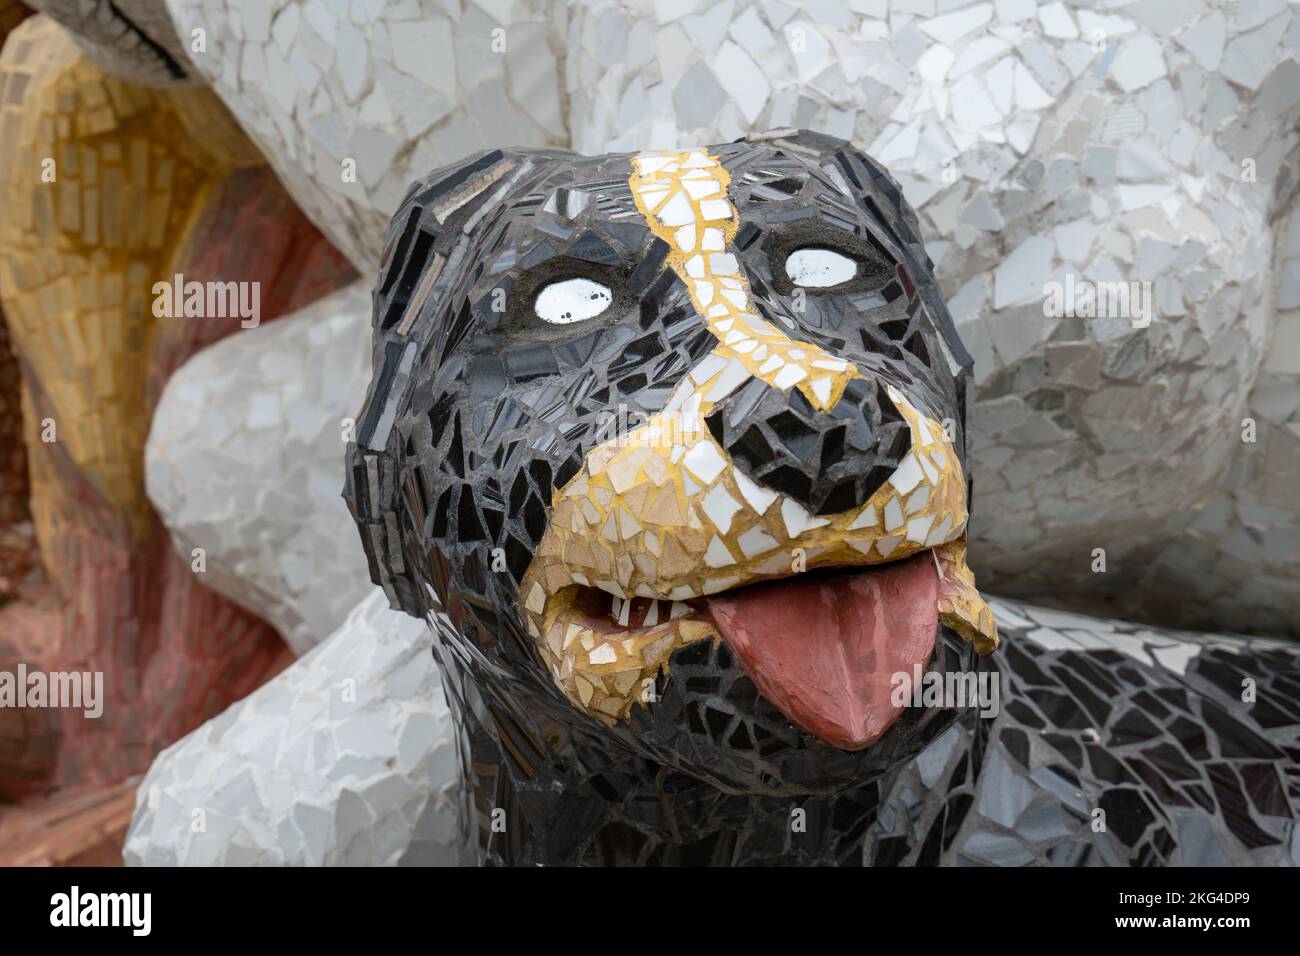 Filandia, Quindio, Colombia - June 5 2022: Blind Dog's Head Made of Pieces of Colored Glass Stock Photo